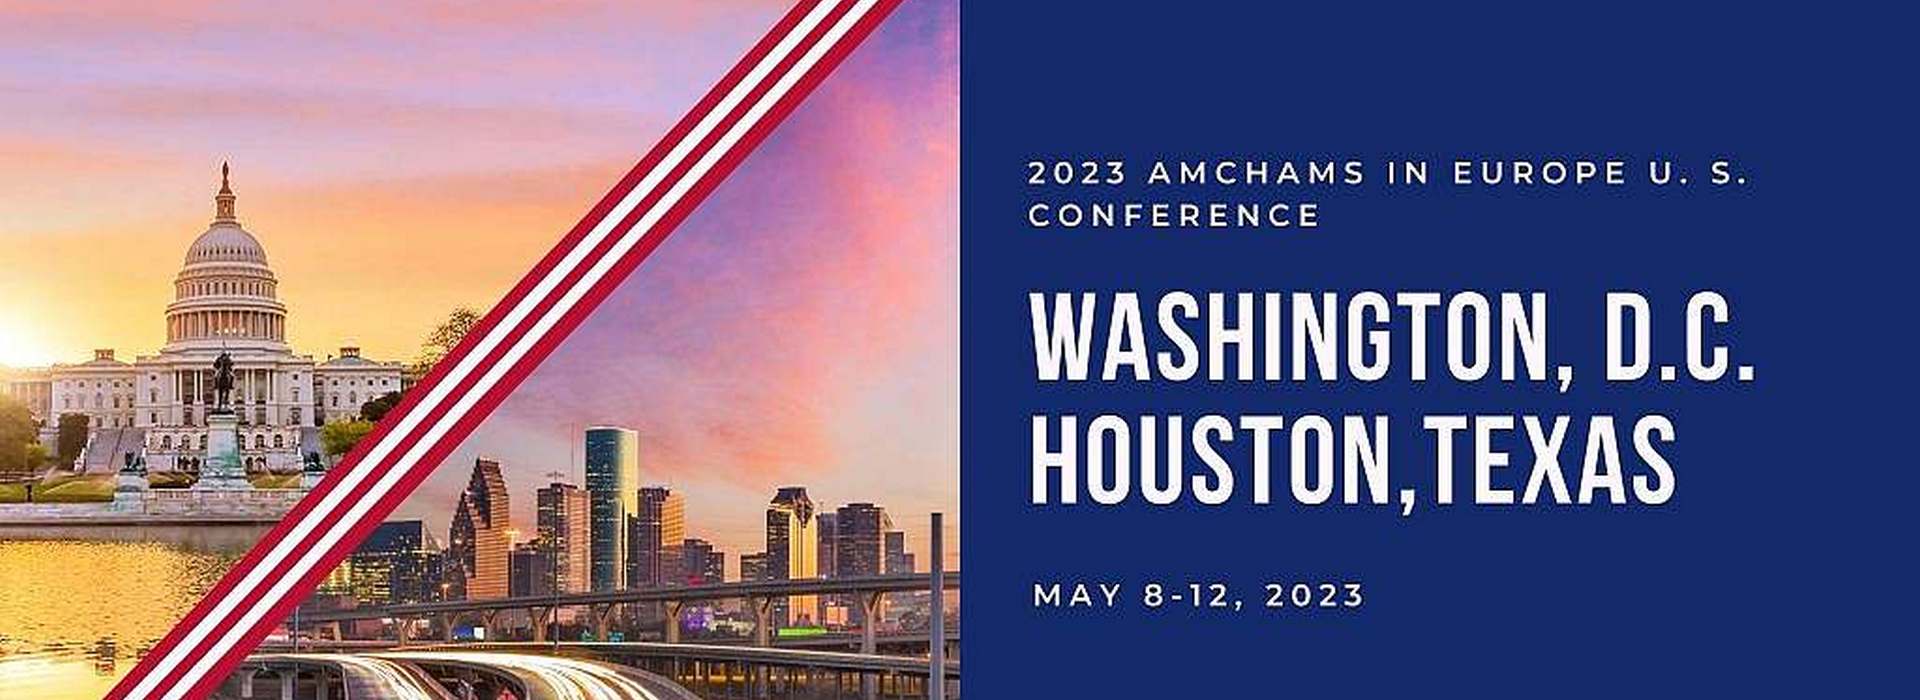 AmChams in Europe Kicks off its Annual Conference in Washington, D.C., and Houston, Texas, Celebrating 60 Years of Transatlantic Relations and Partnerships